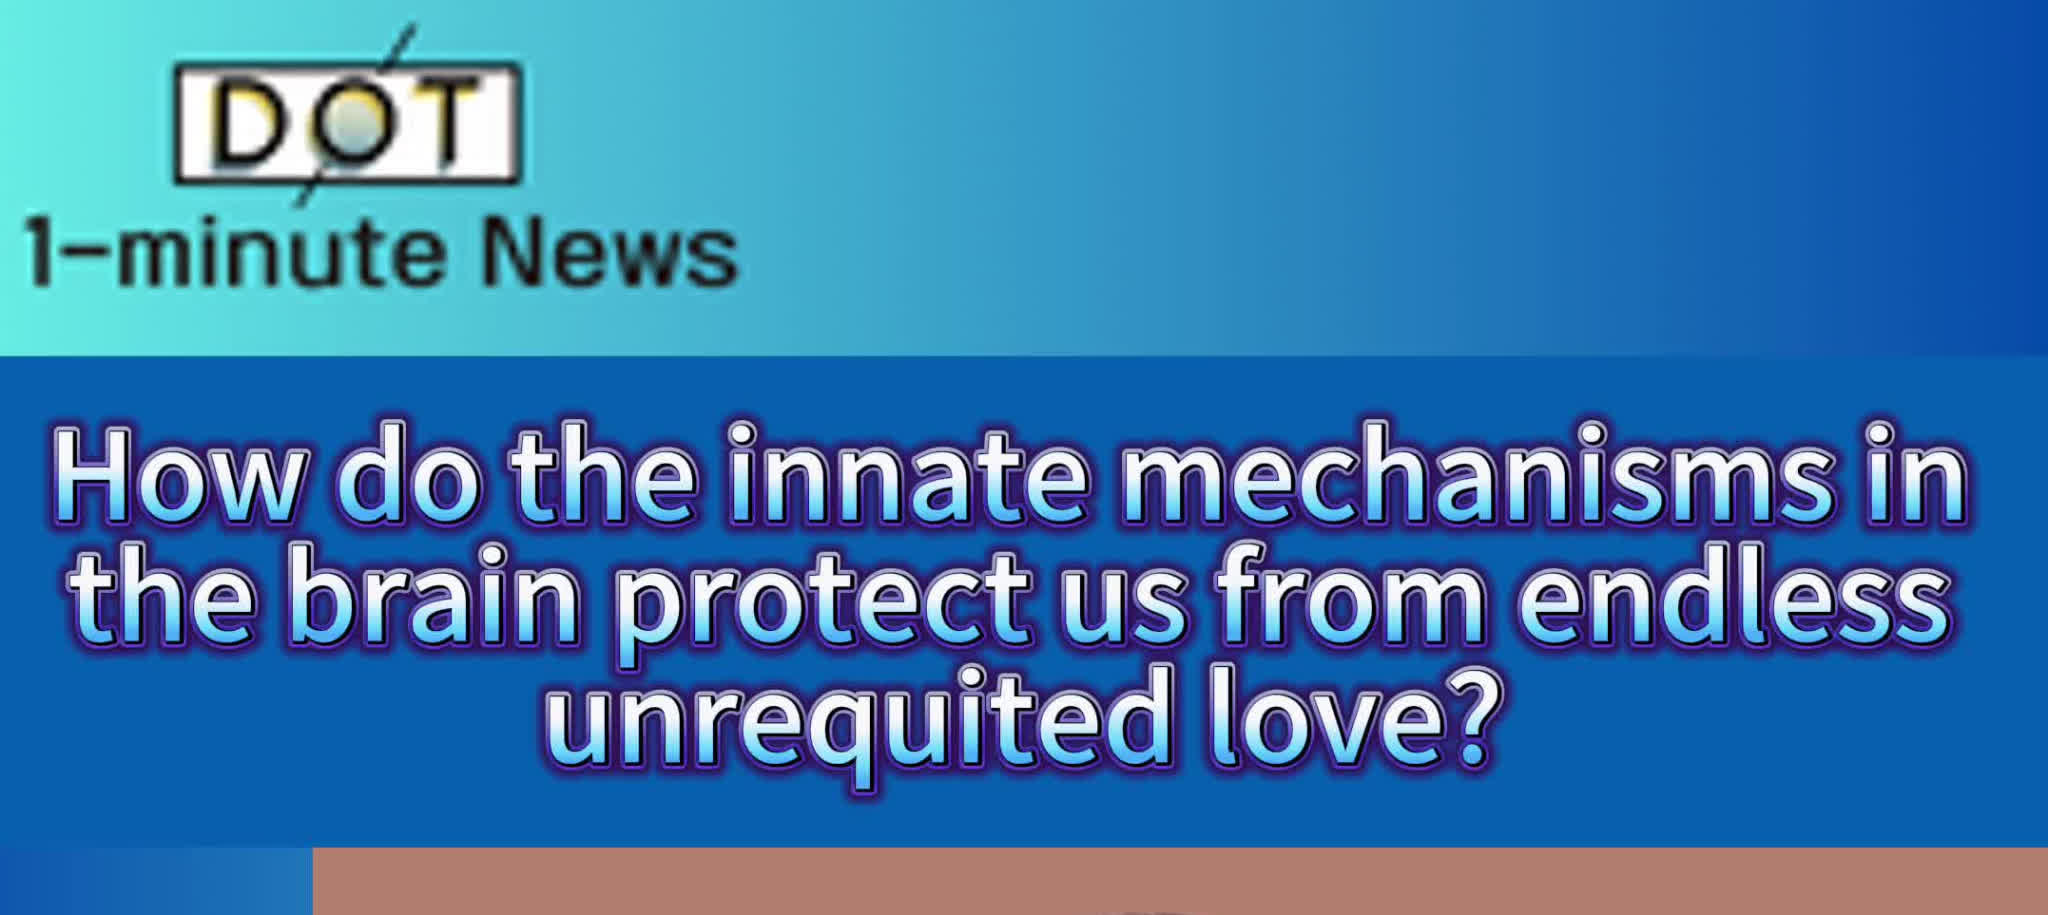 1-minute News | Say goodbye to unrequited love! Self-protection mechanism works